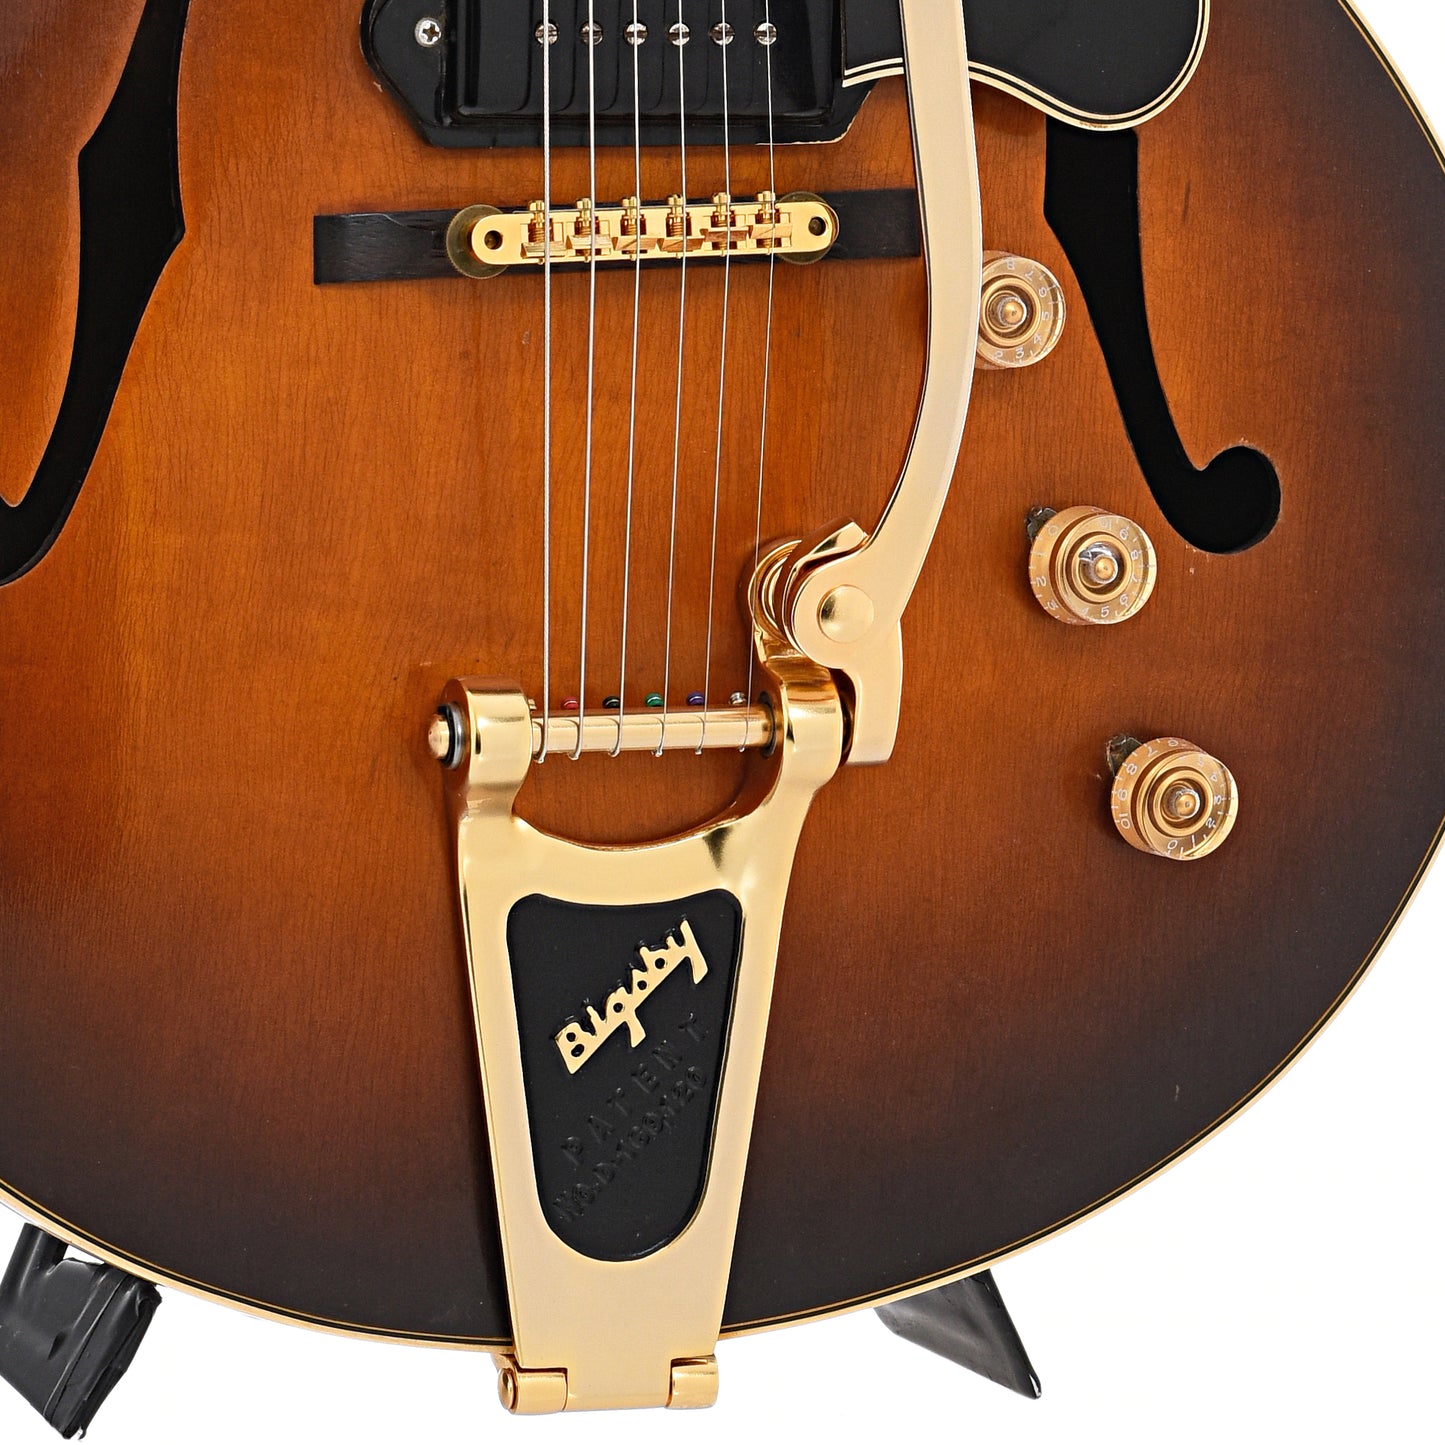 Bigsby Tailpiece and bridge of Gibson ES-5 Hollowbody Electric Guitar (1950)